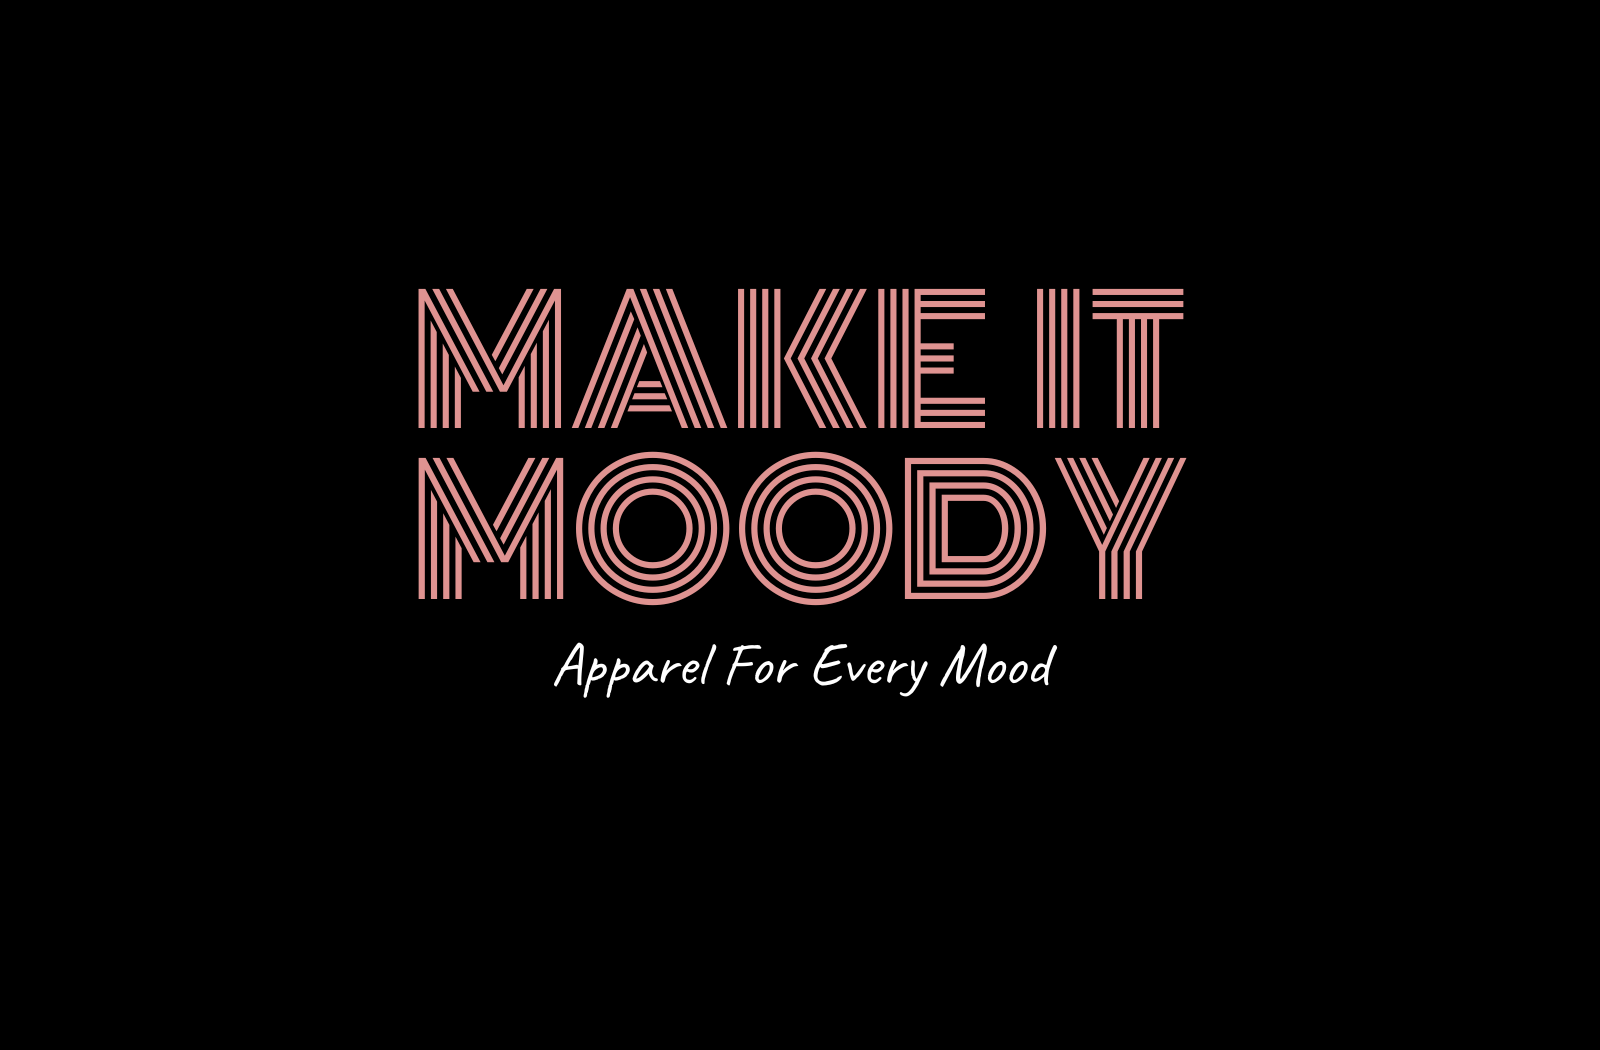 Moody Apparel, Accessories, and Gifts